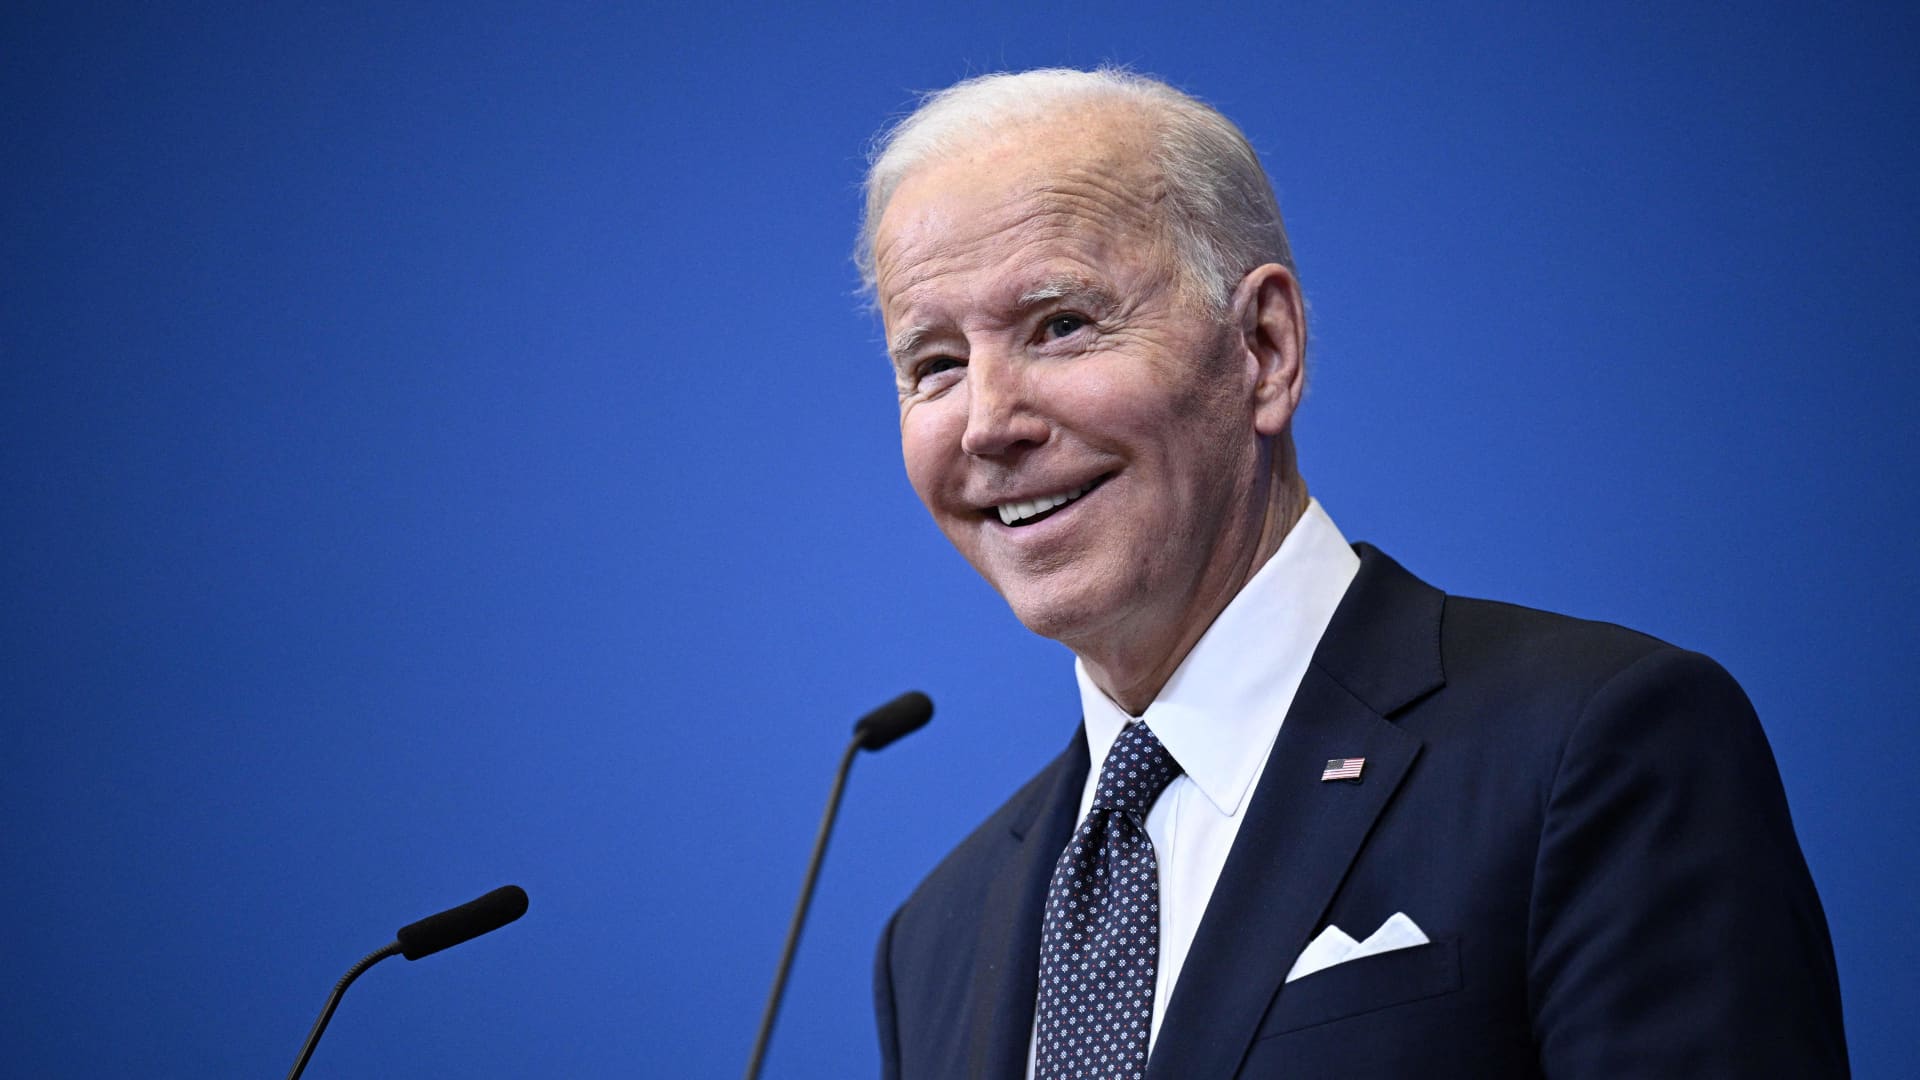 Biden says he'd be 'very fortunate' to face Trump in 2024 presidential election